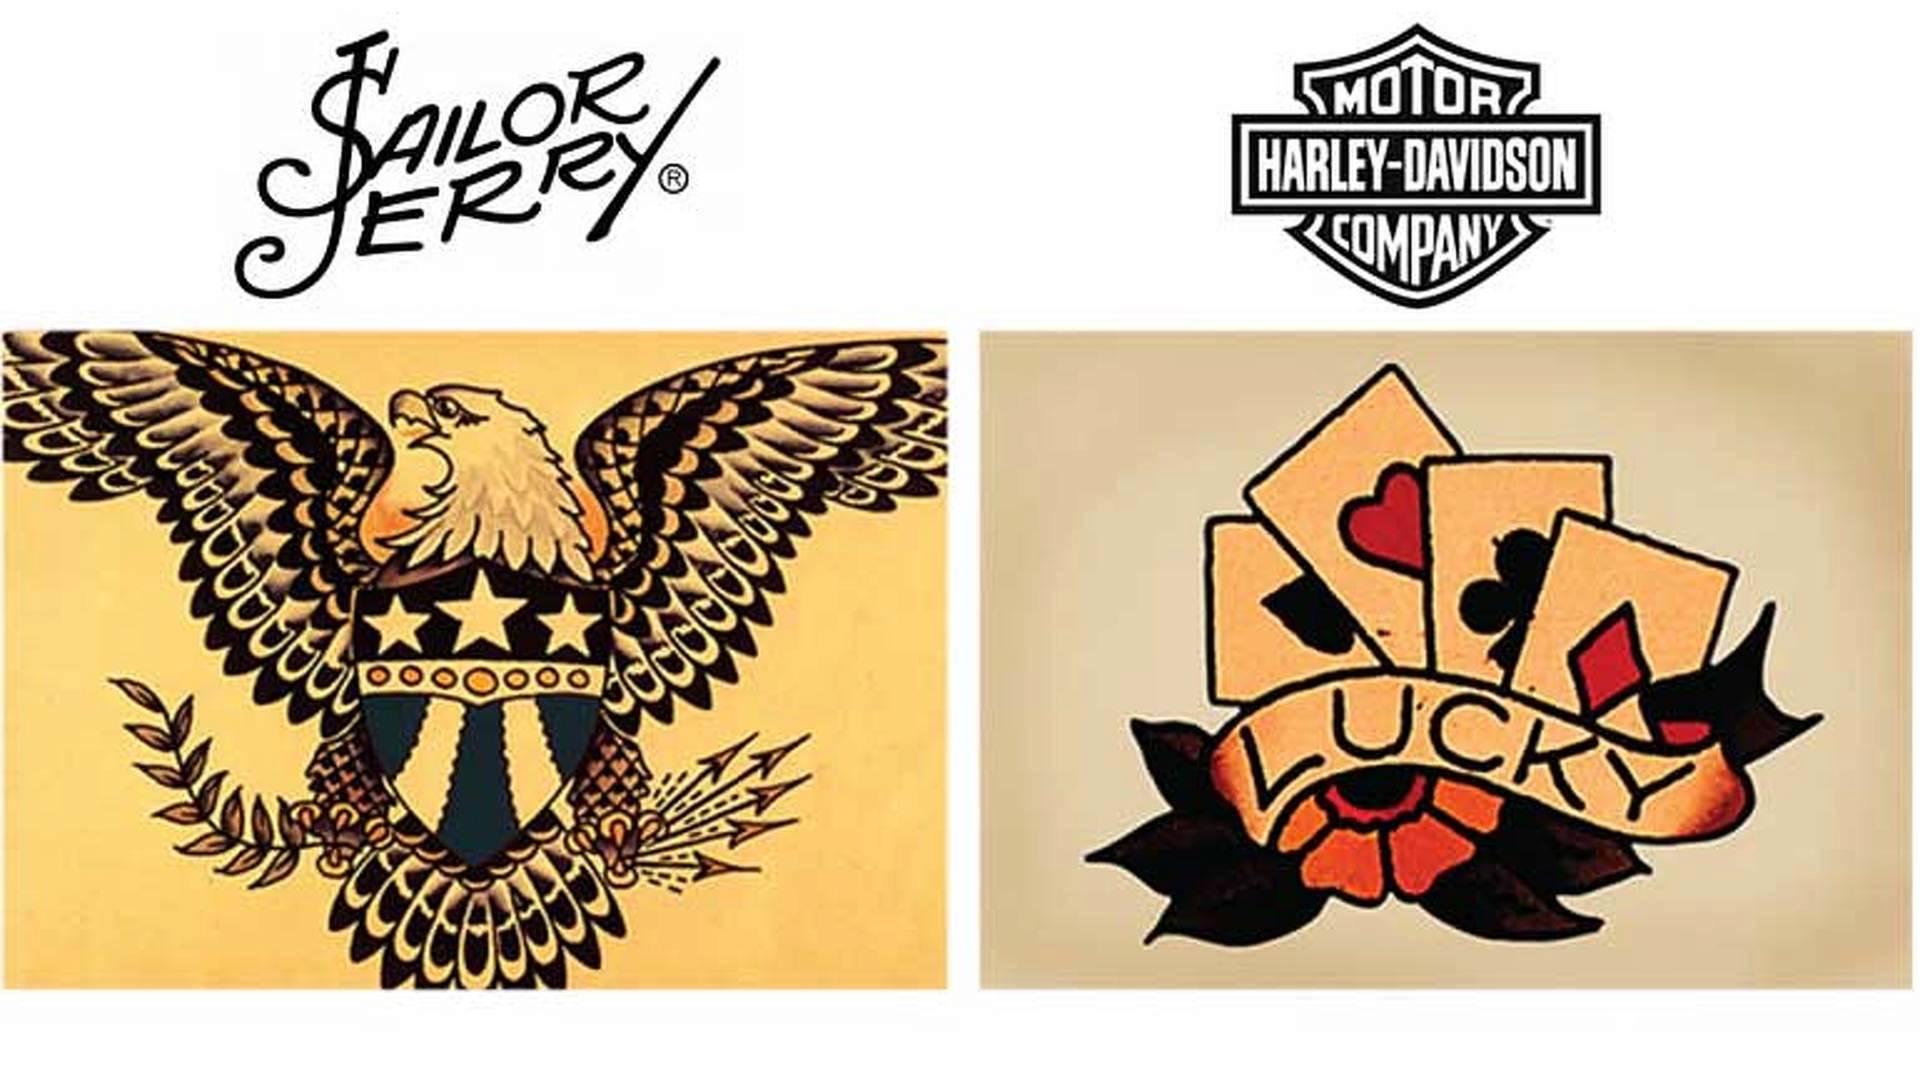 Sailor Jerry Teams With Harley Davidson